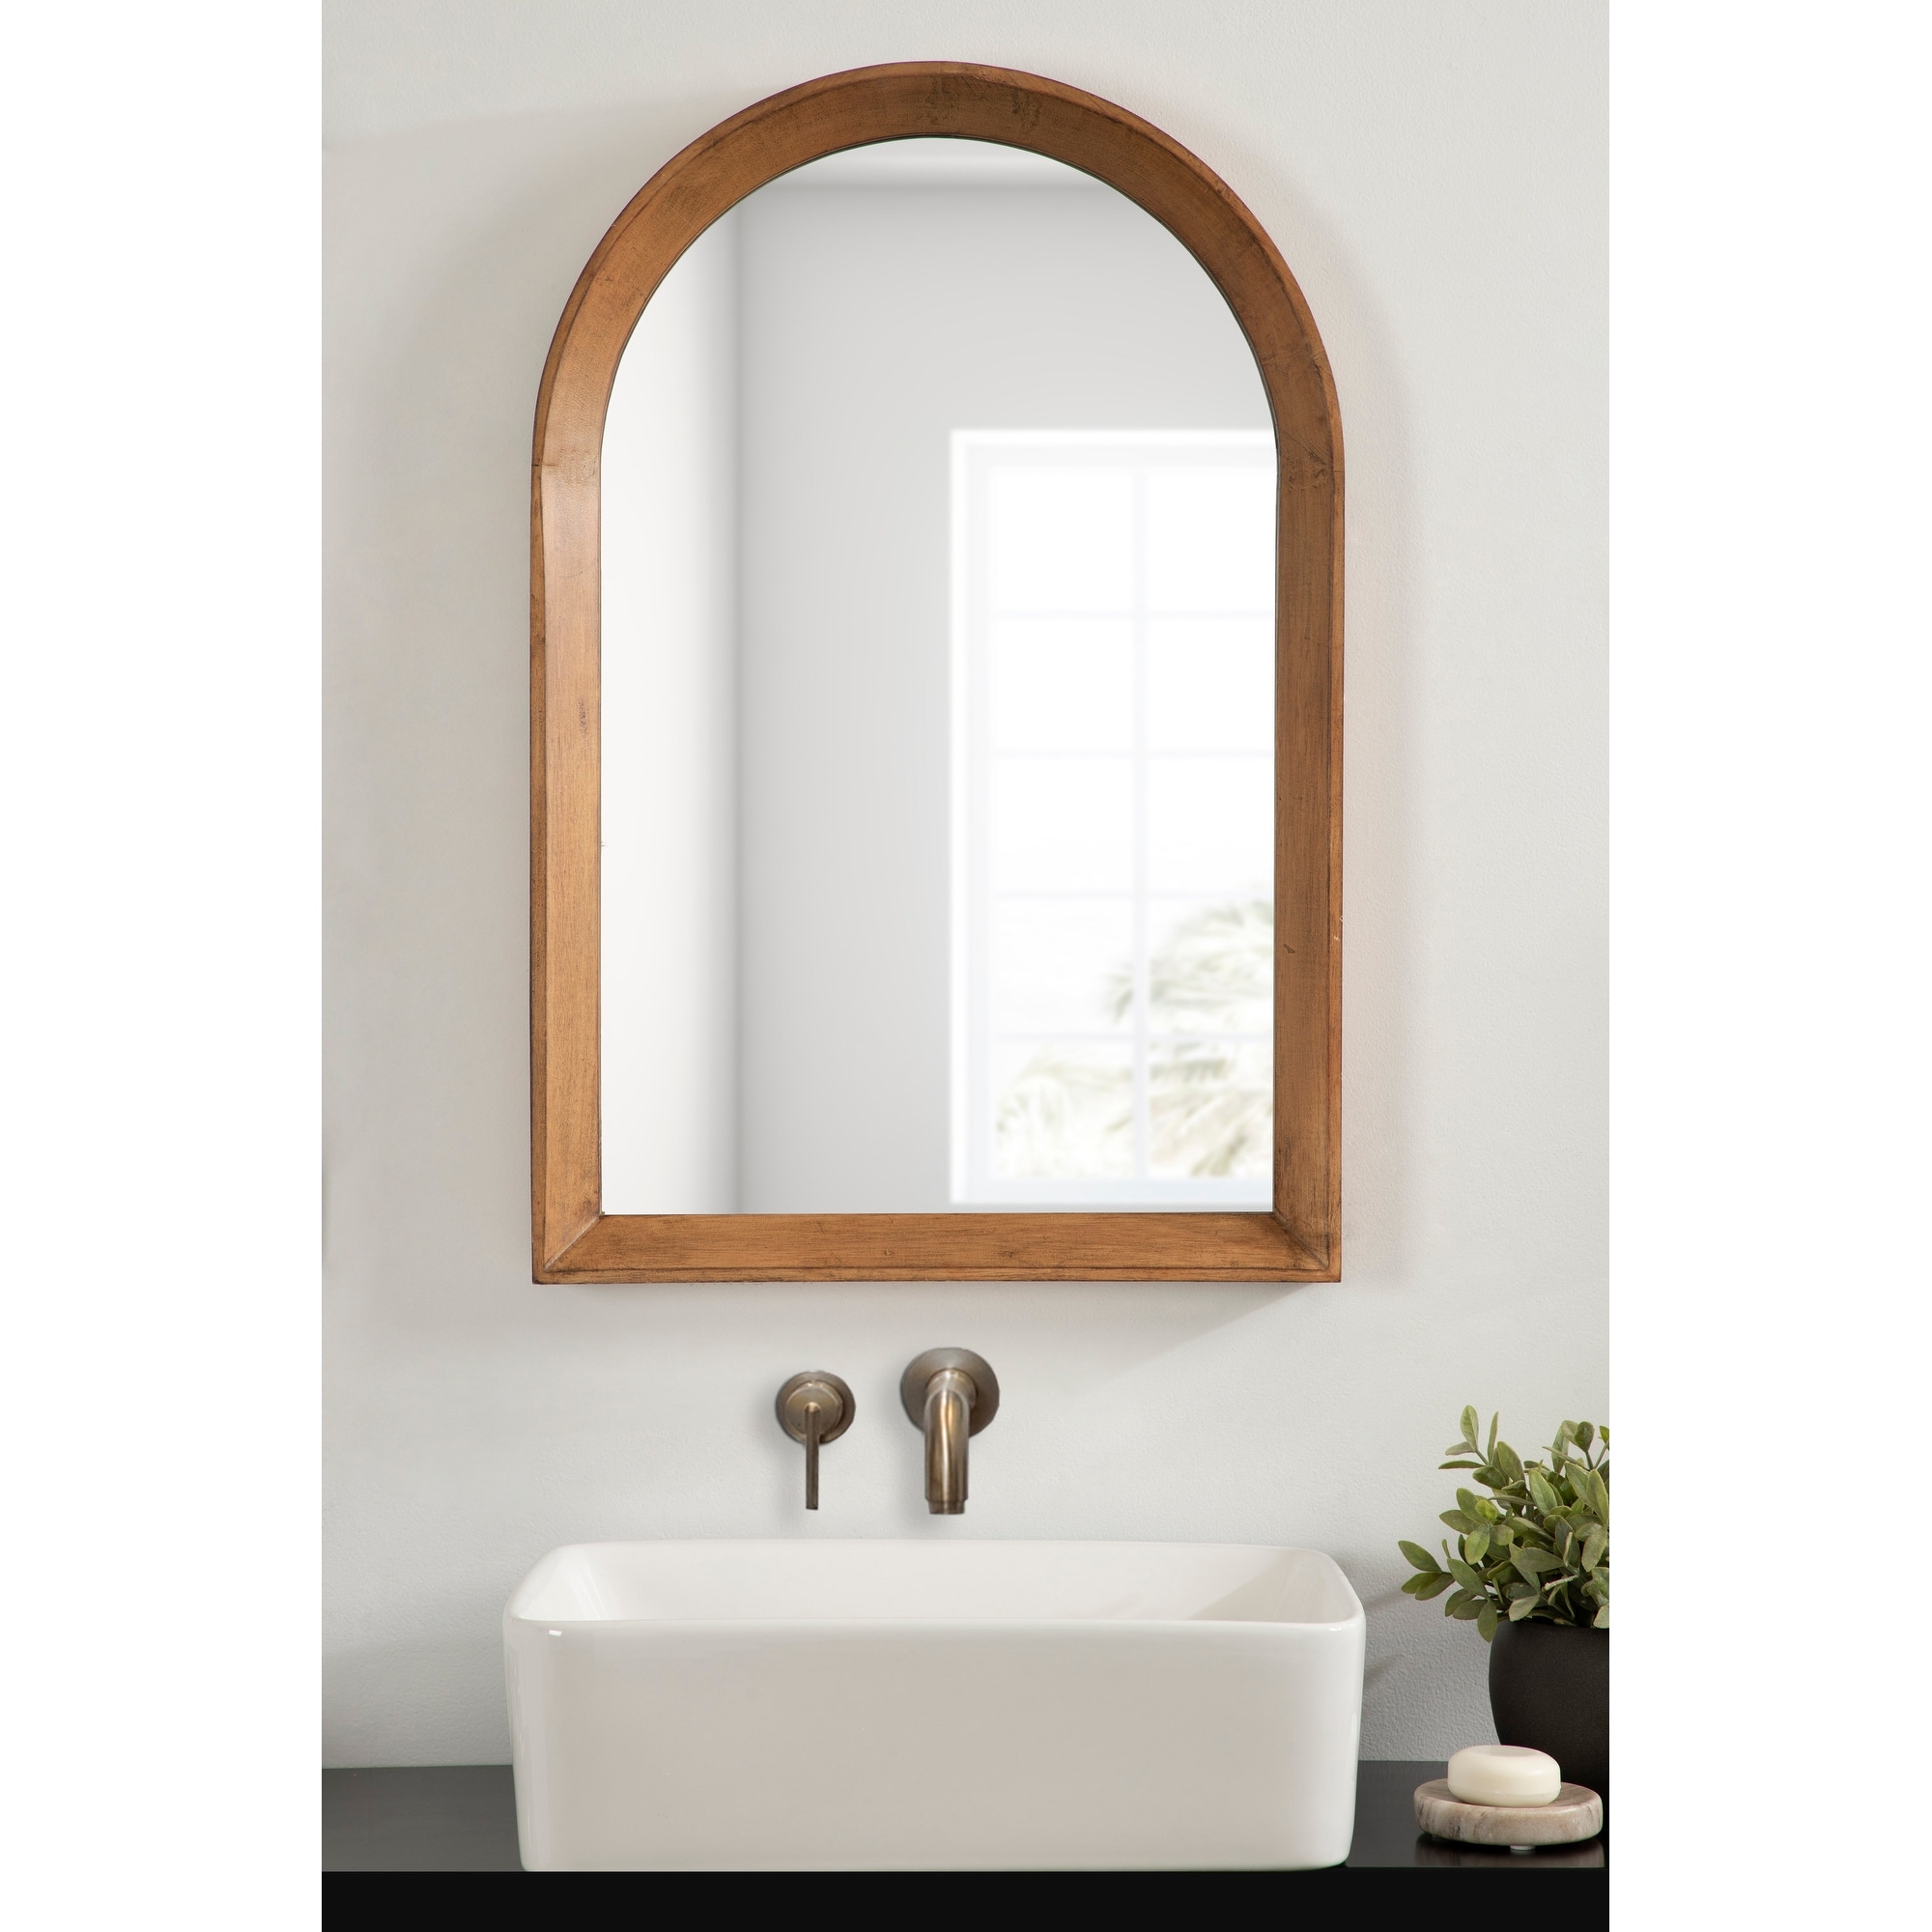 Kate and Laurel Hartman Wood Framed Arch Wall Mirror On Sale Bed Bath   Beyond 35102877